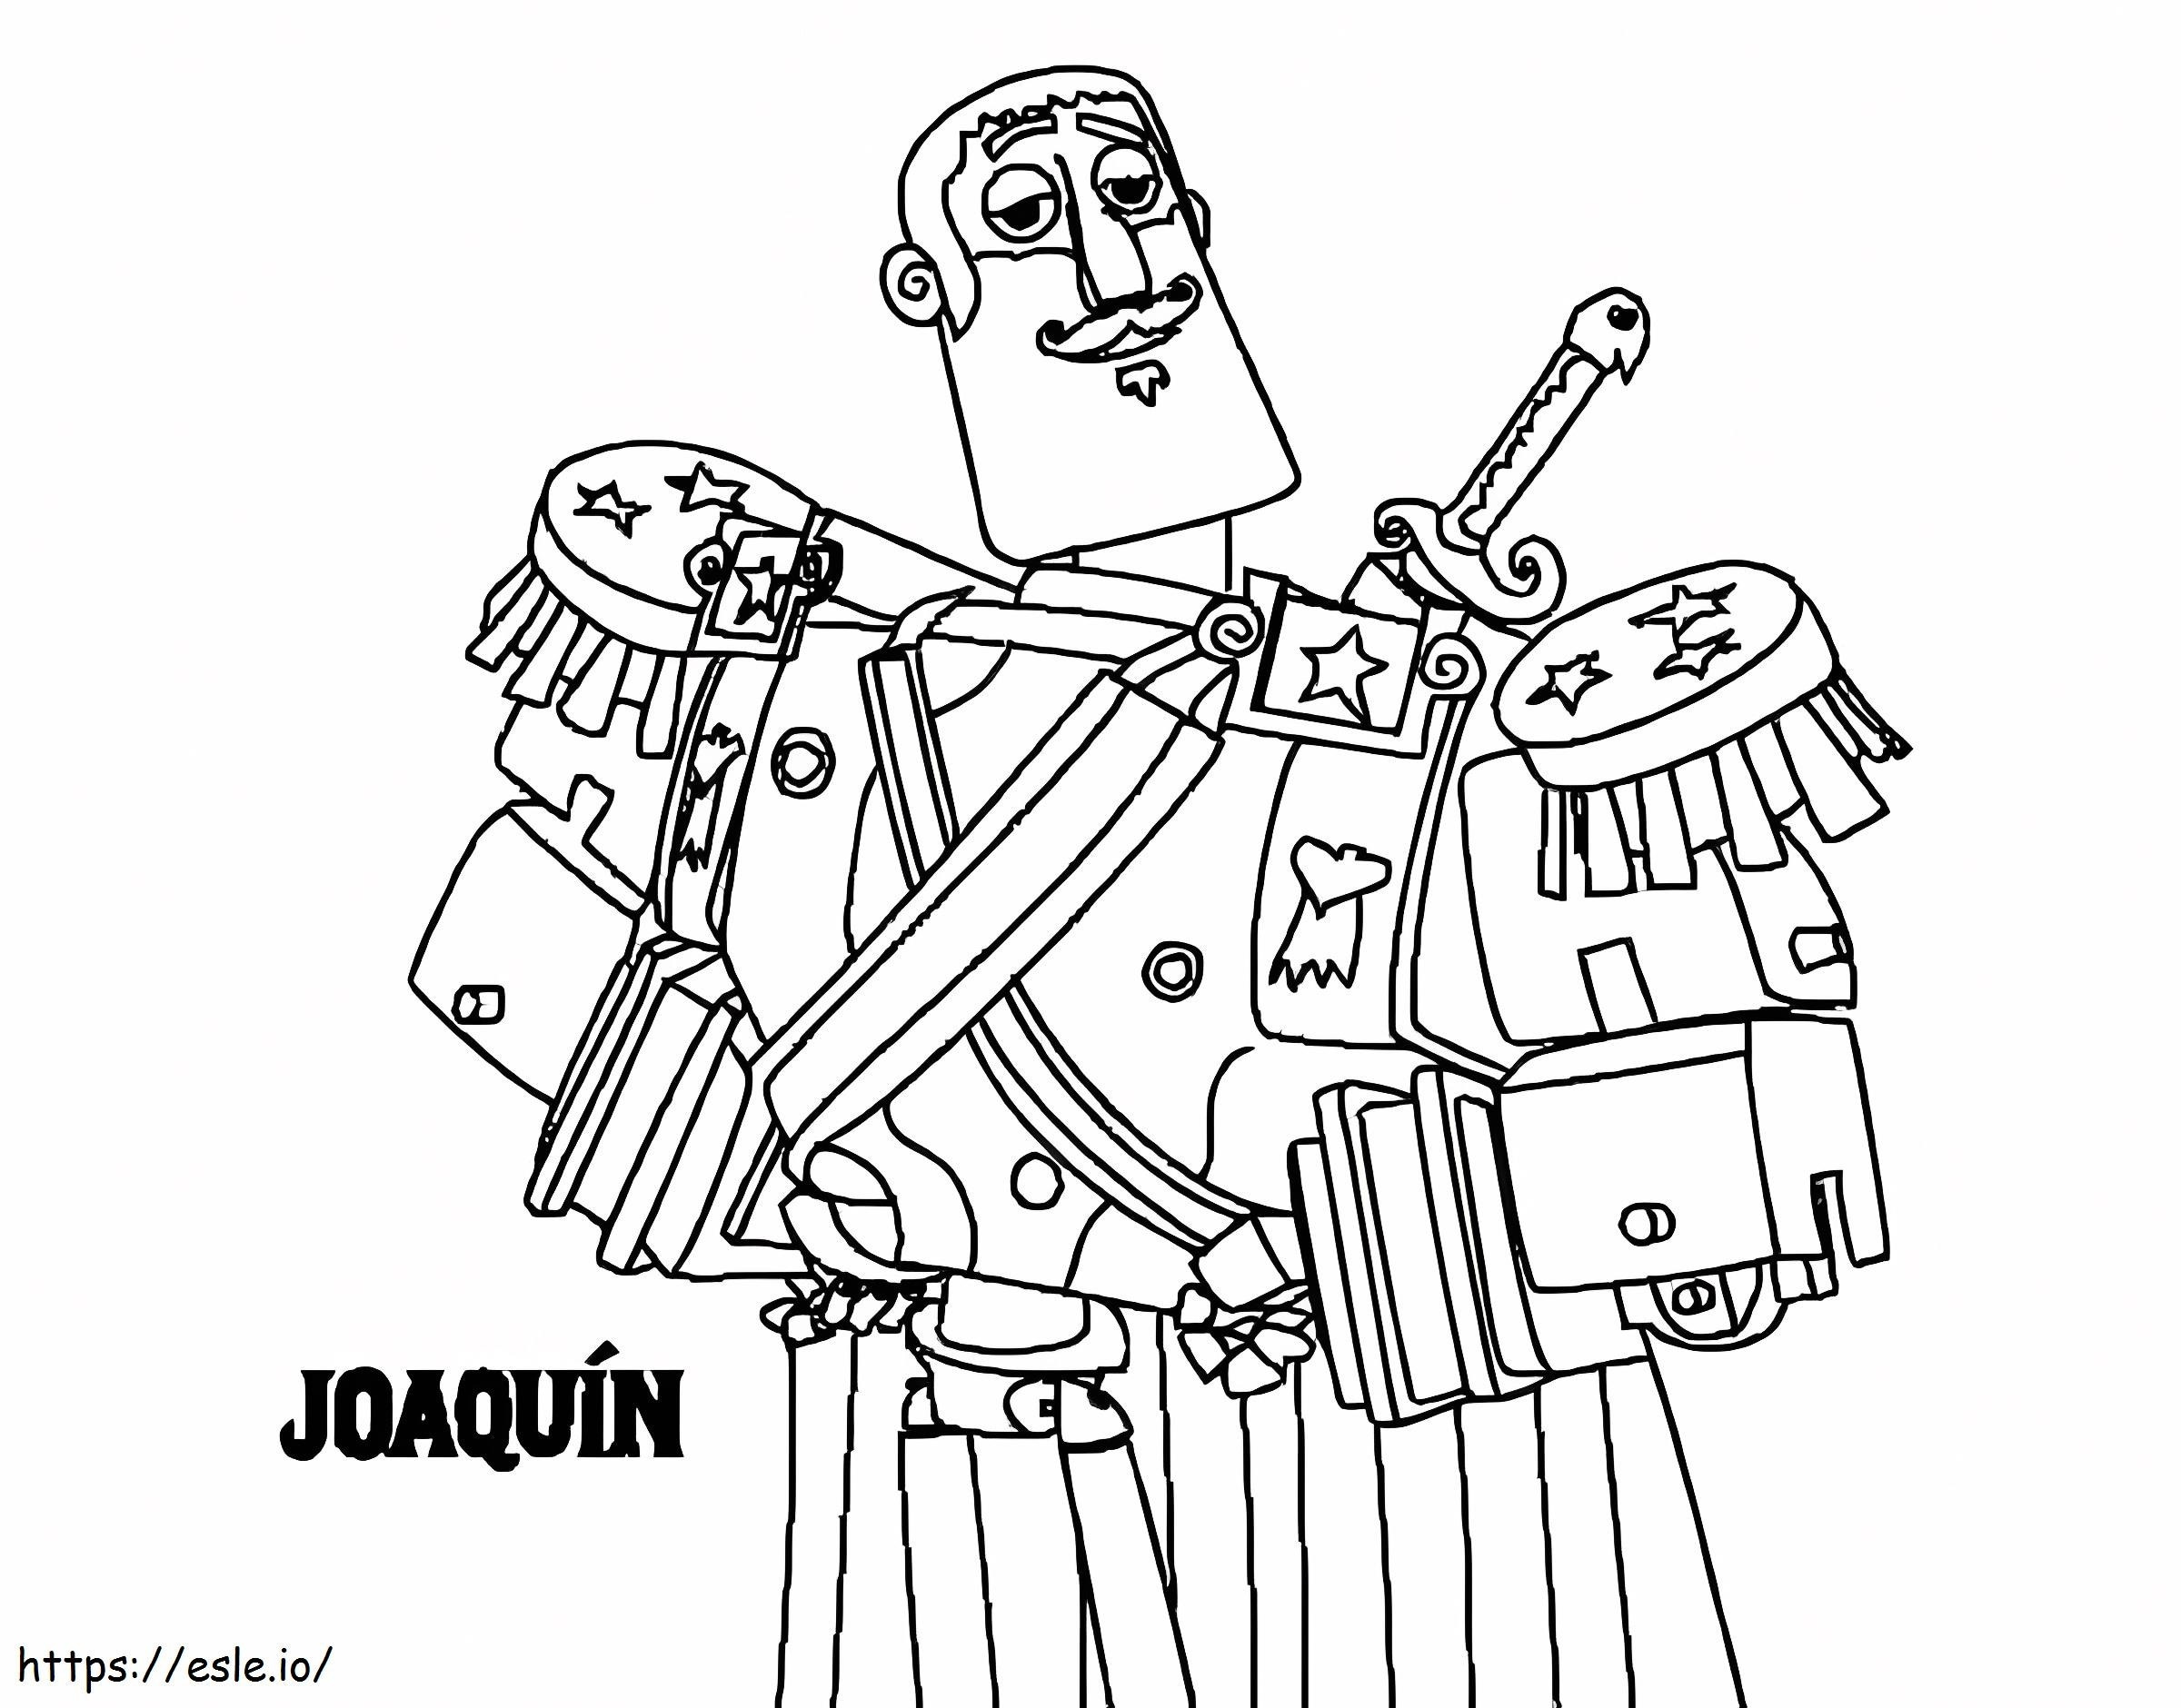 Joaquin From The Book Of Life coloring page